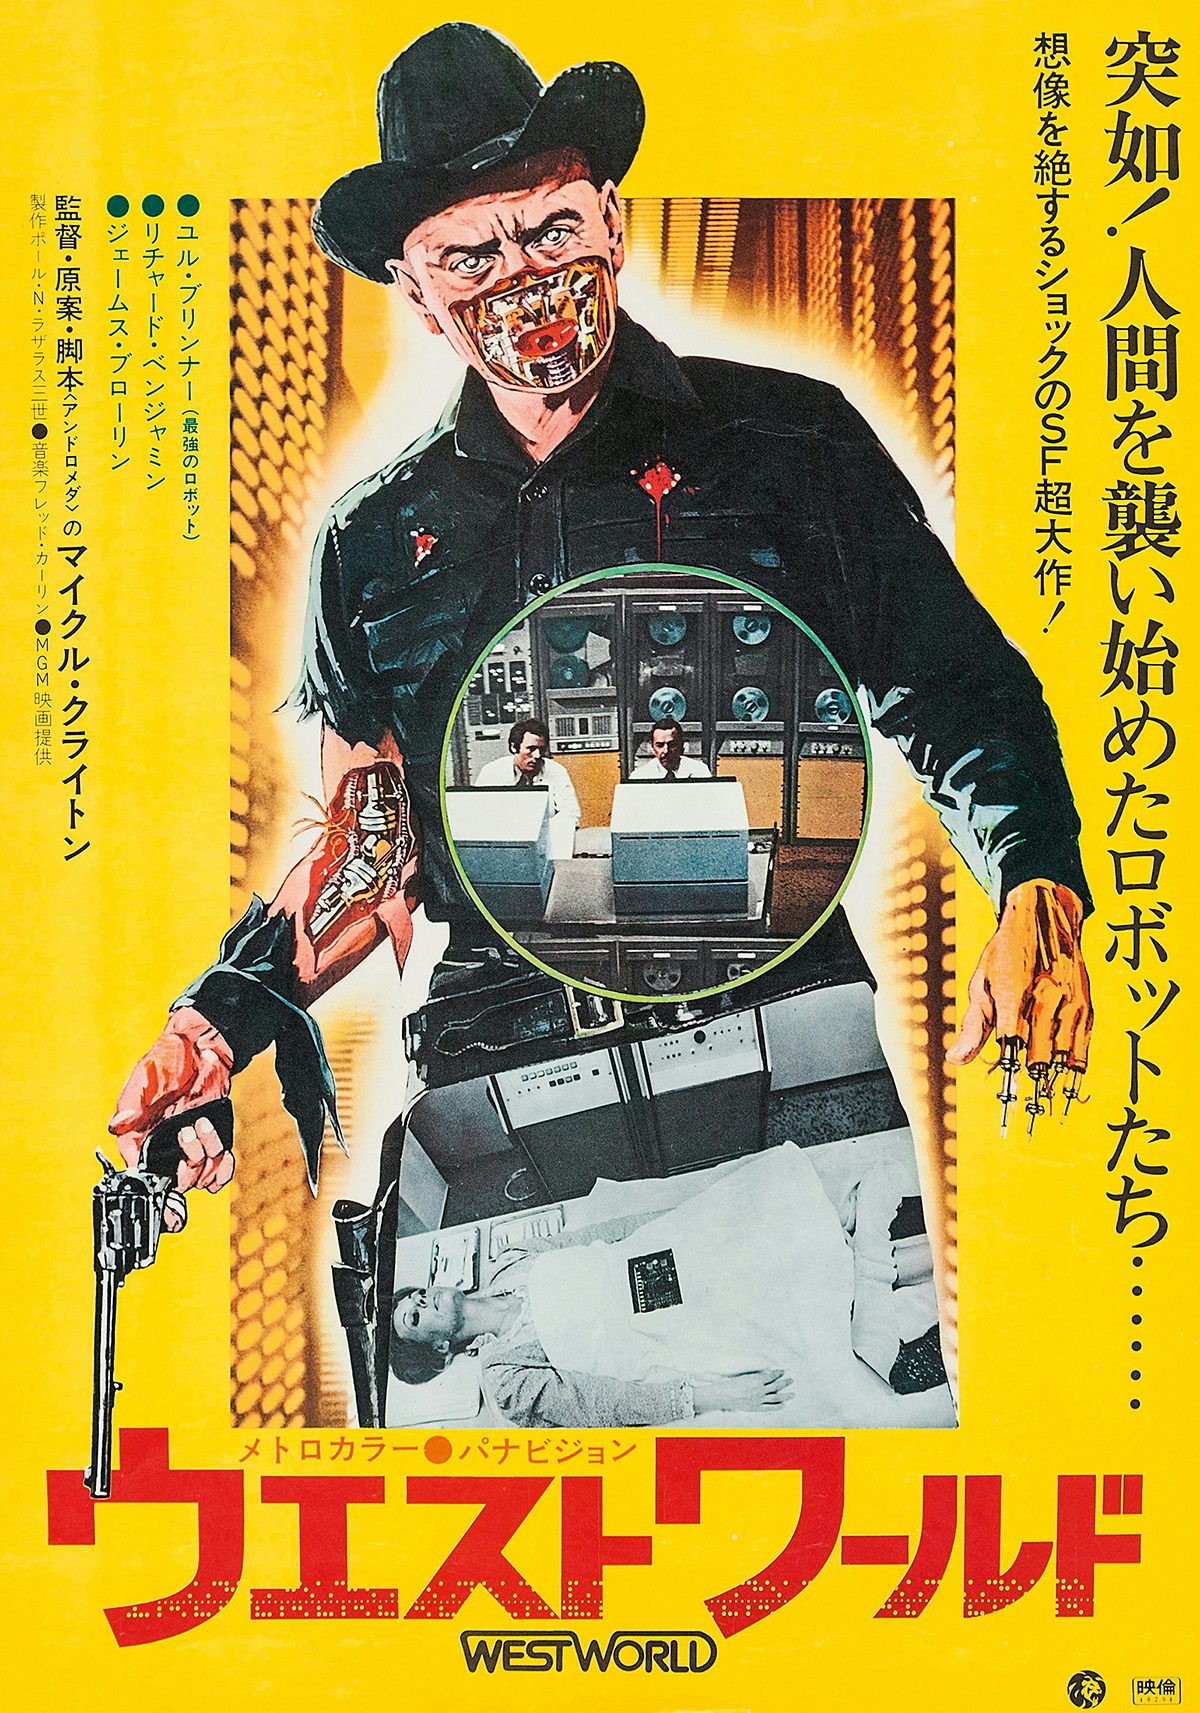 Image shows the yellow poster design for Westworld, showing an illustration of a man in a black rimmed hat holding a hand gun and text written in katakana beneath